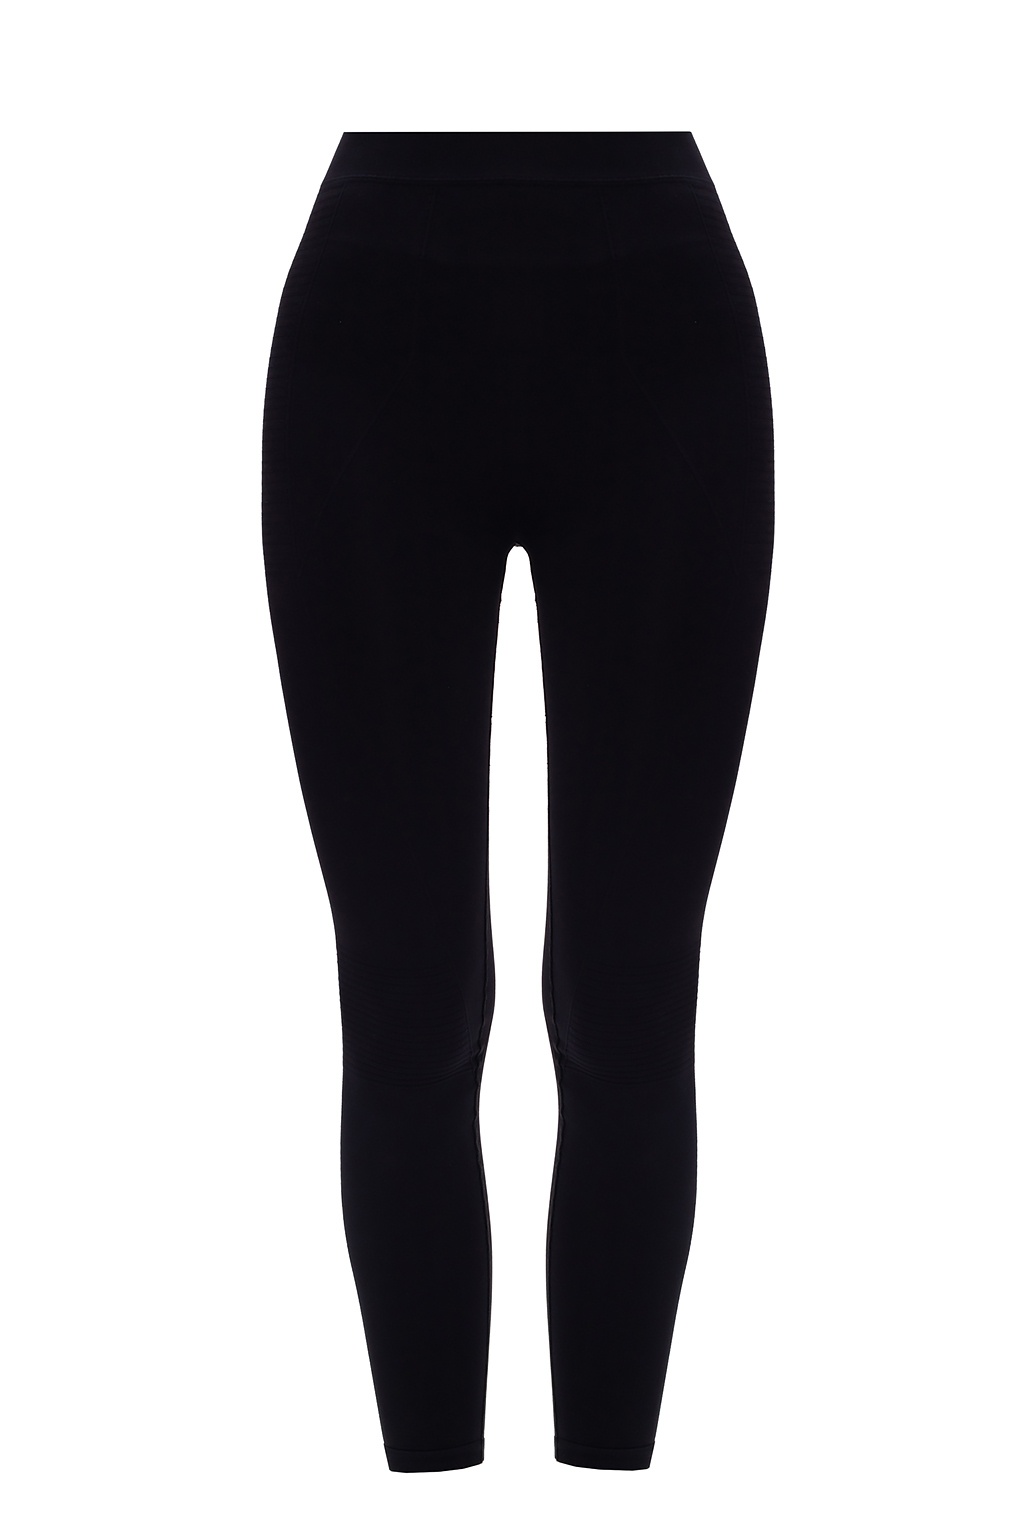 Buy Black/Grey Elasticated Waist Jeggings 2 Pack (3-16yrs) from